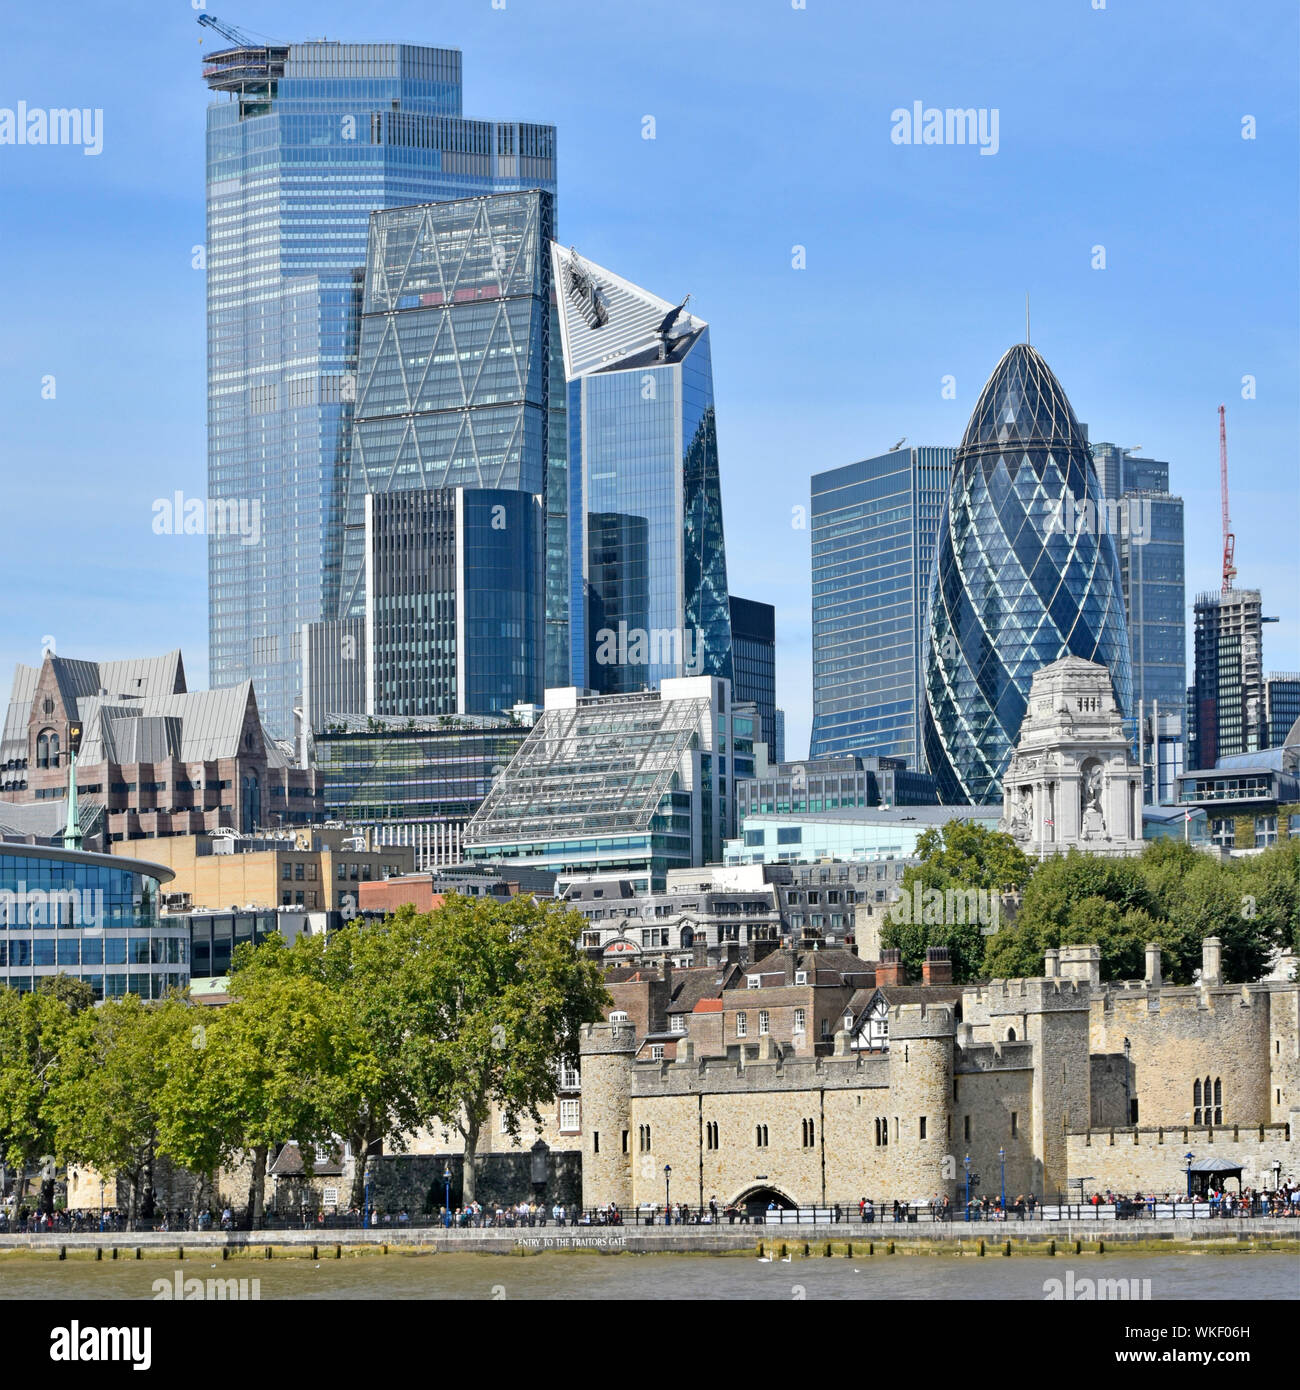 Tower of London dwarfed by skyline & cityscape of skyscraper building construction 2019 in city square mile business district River Thames England UK Stock Photo